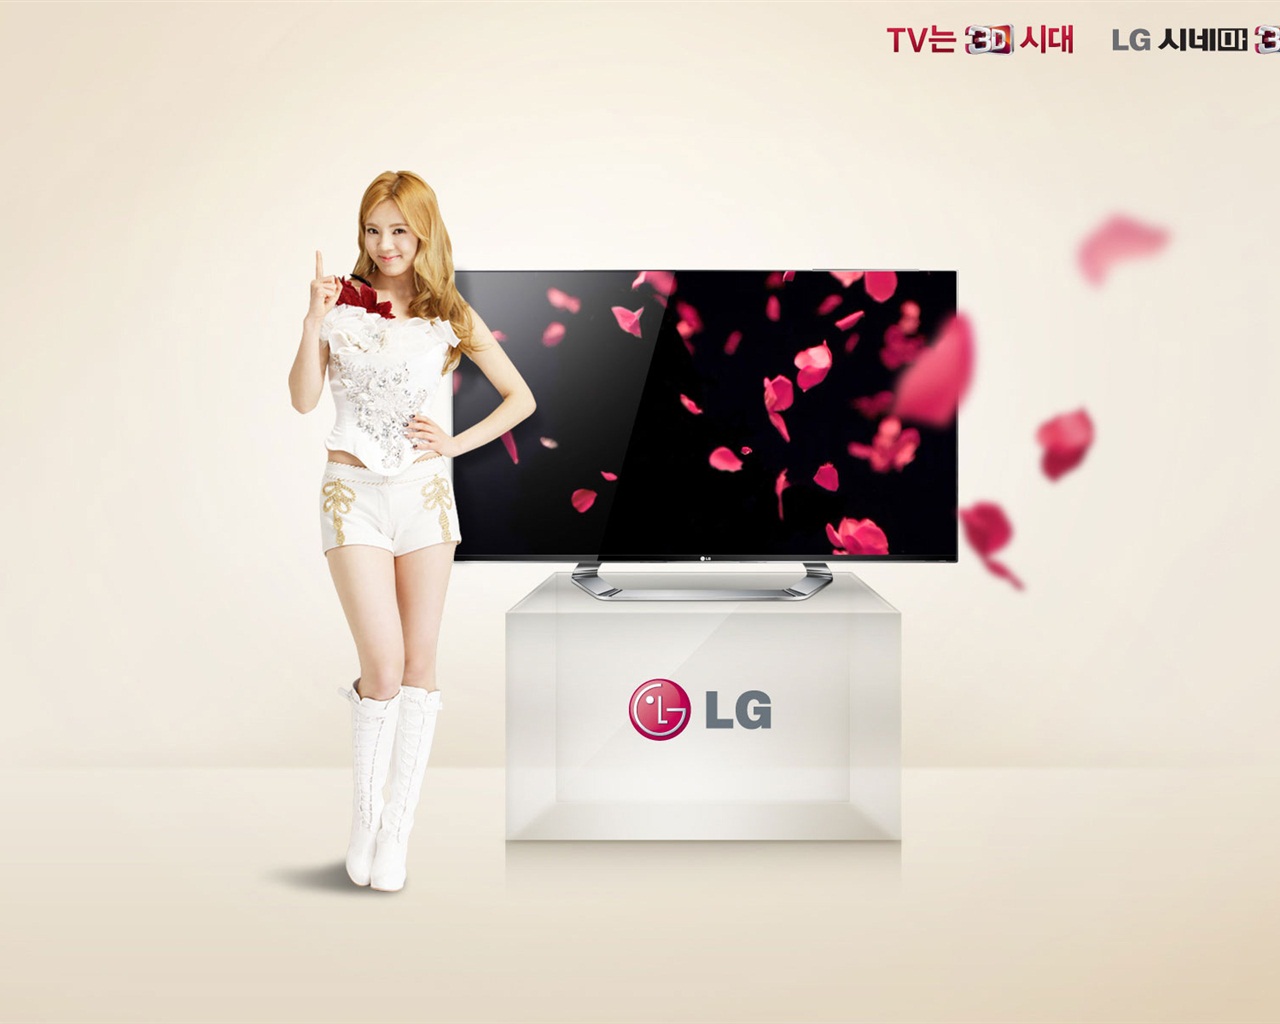 Girls Generation ACE and LG endorsements ads HD wallpapers #13 - 1280x1024